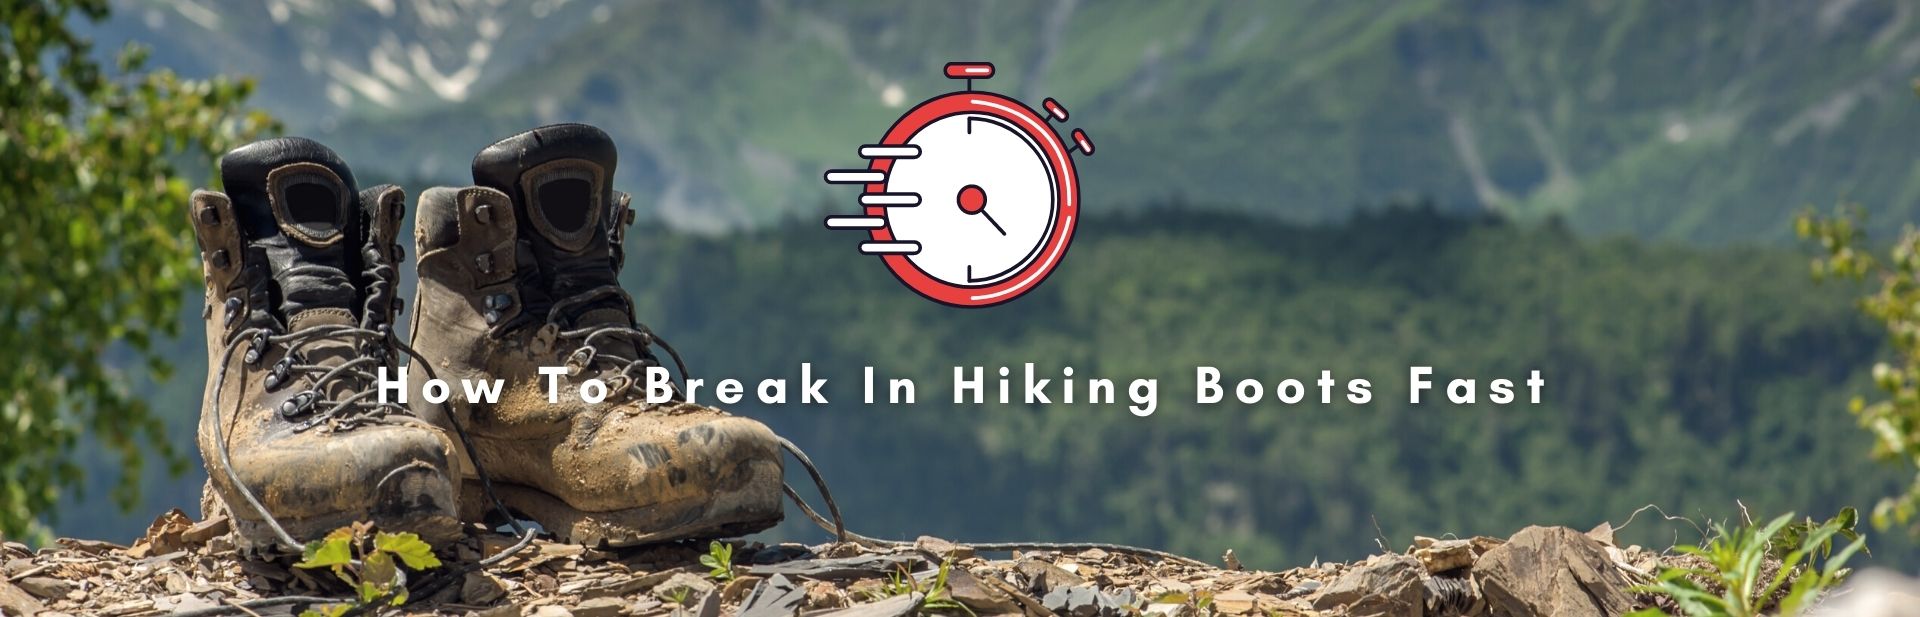 How To Break In Hiking Boots Fast